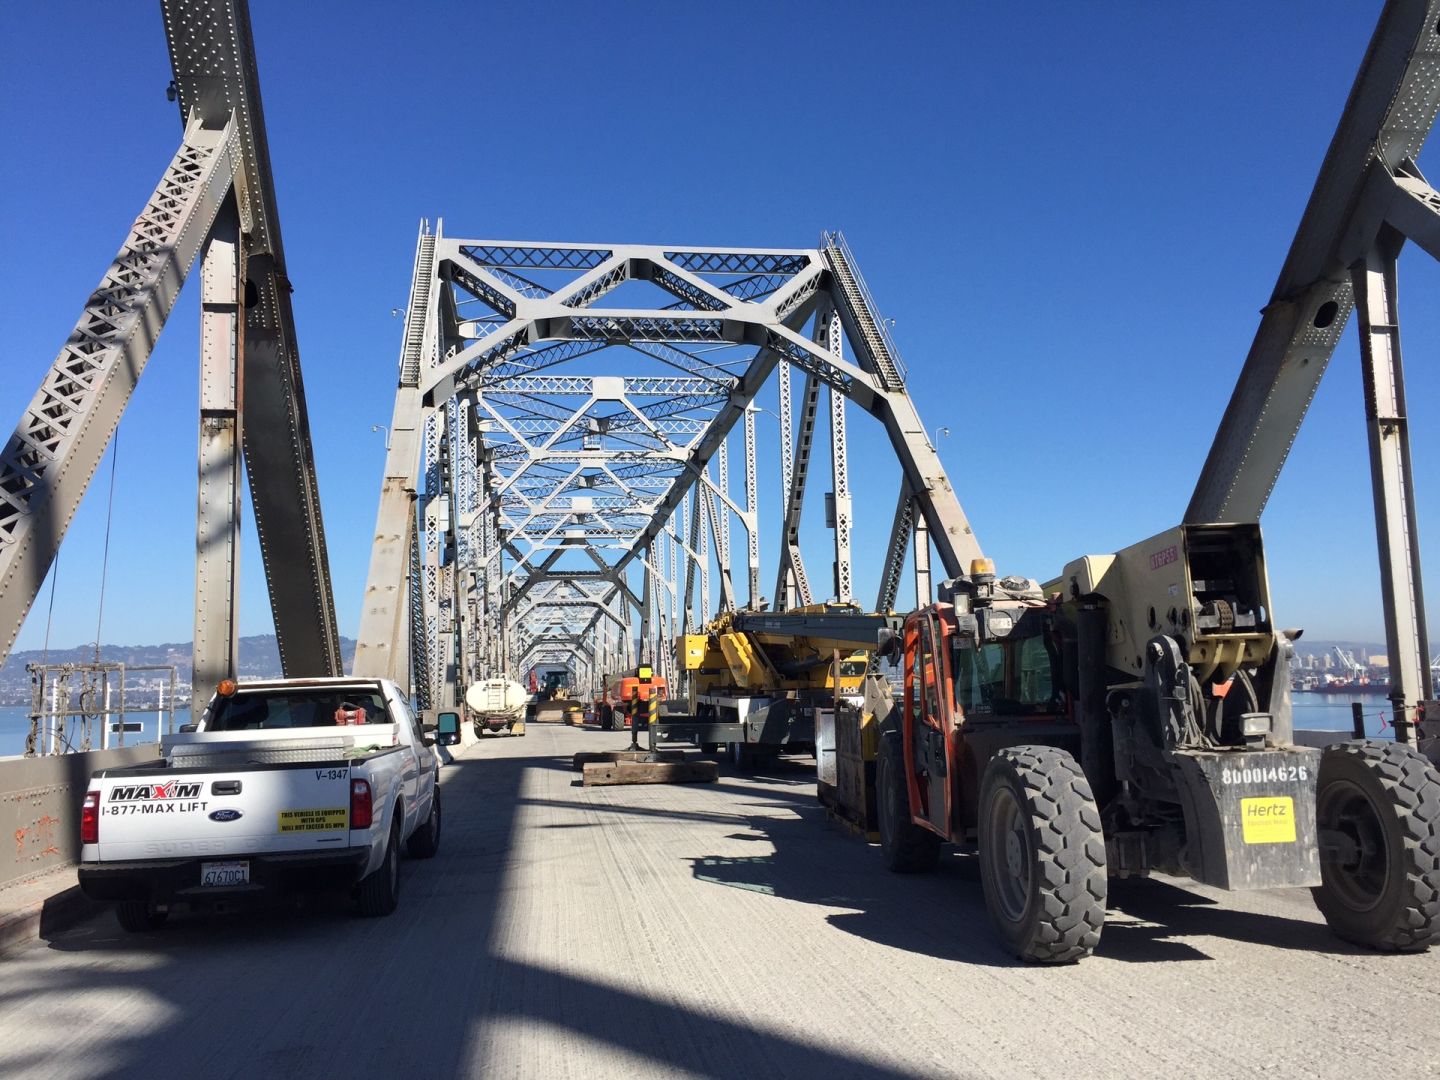 Crews are nearing the end of phase two of demolition of the older eastern span of the Bay Bridge.